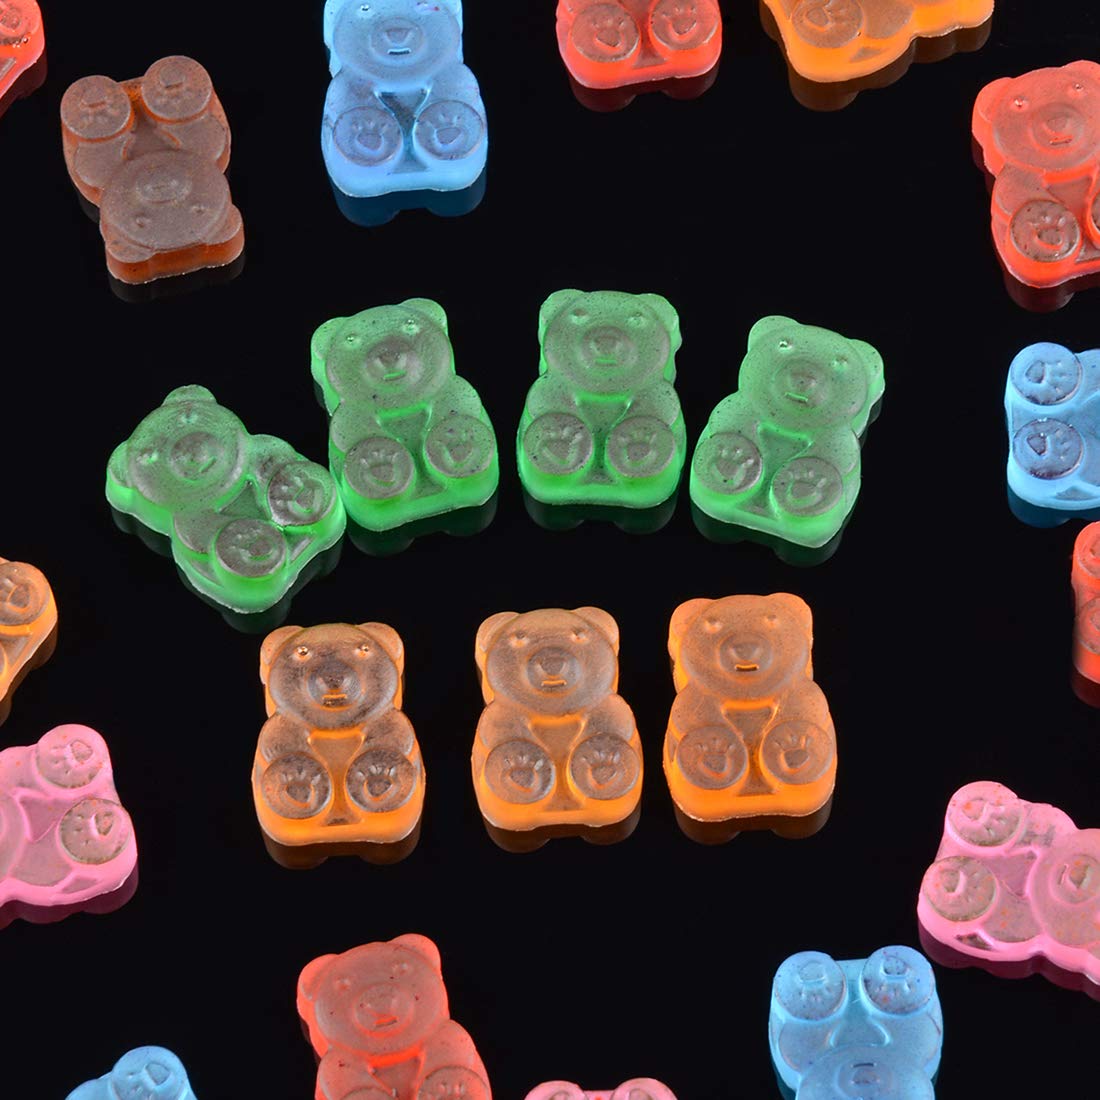 CAKETIME Gummy Bear Molds Candy Molds - Large Gummy Molds 1 Inch Bear Chocolate Molds Silicone 4 Pack LFGB Pinch Test Approved Best Food Grade Silicone Molds